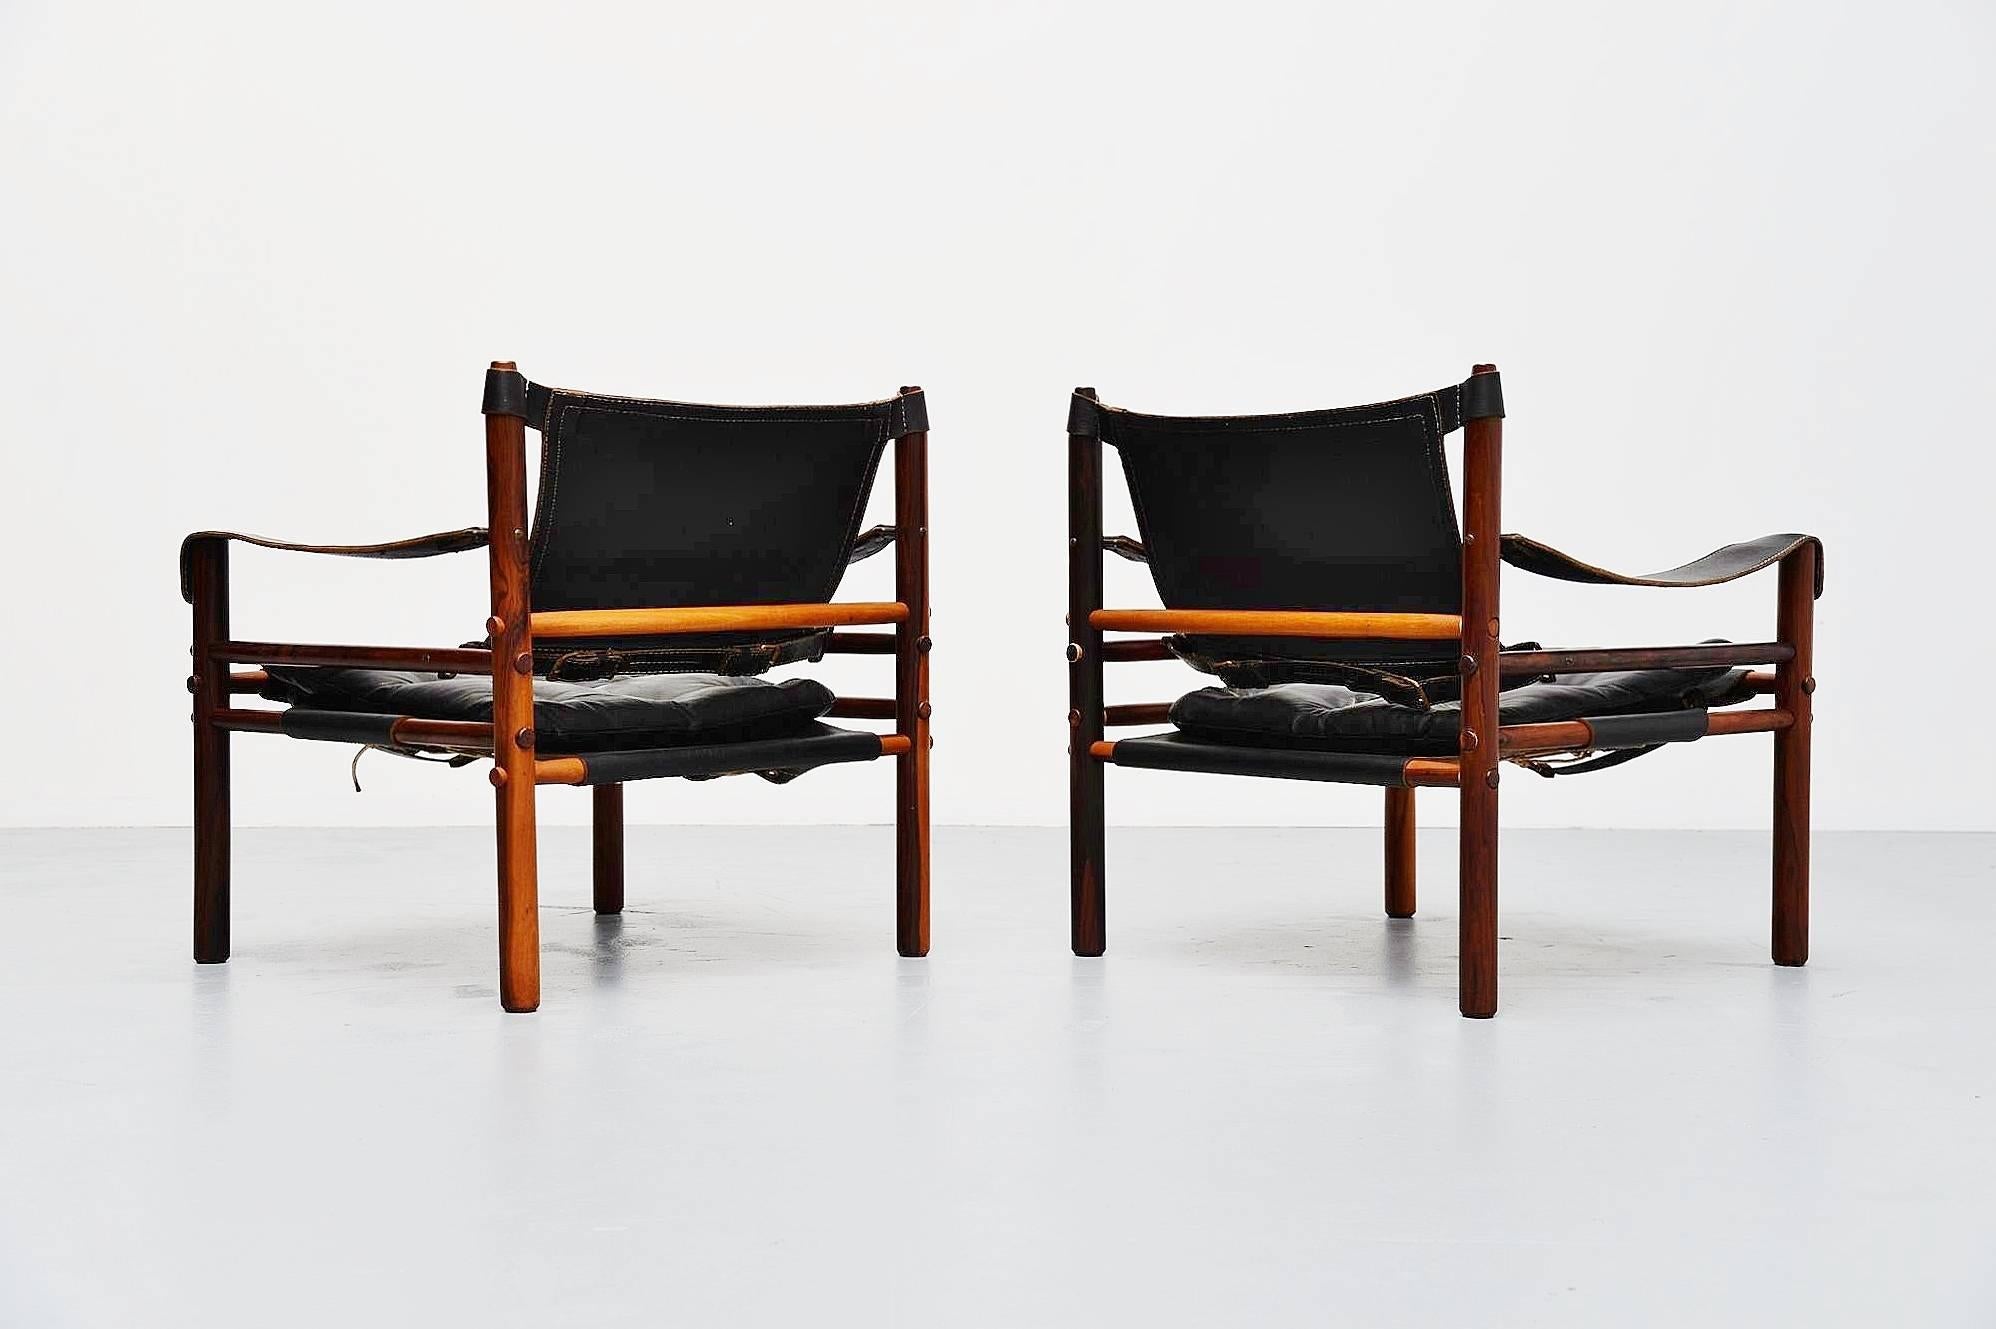 Excellent pair of Sirocco lounge chairs designed by Arne Norell, manufactured by Norell Mobler AB, Sweden 1964. These chairs have very nice grained solid rosewood frames and thick black leather seats with lovely patina. The chairs are fully in tact,